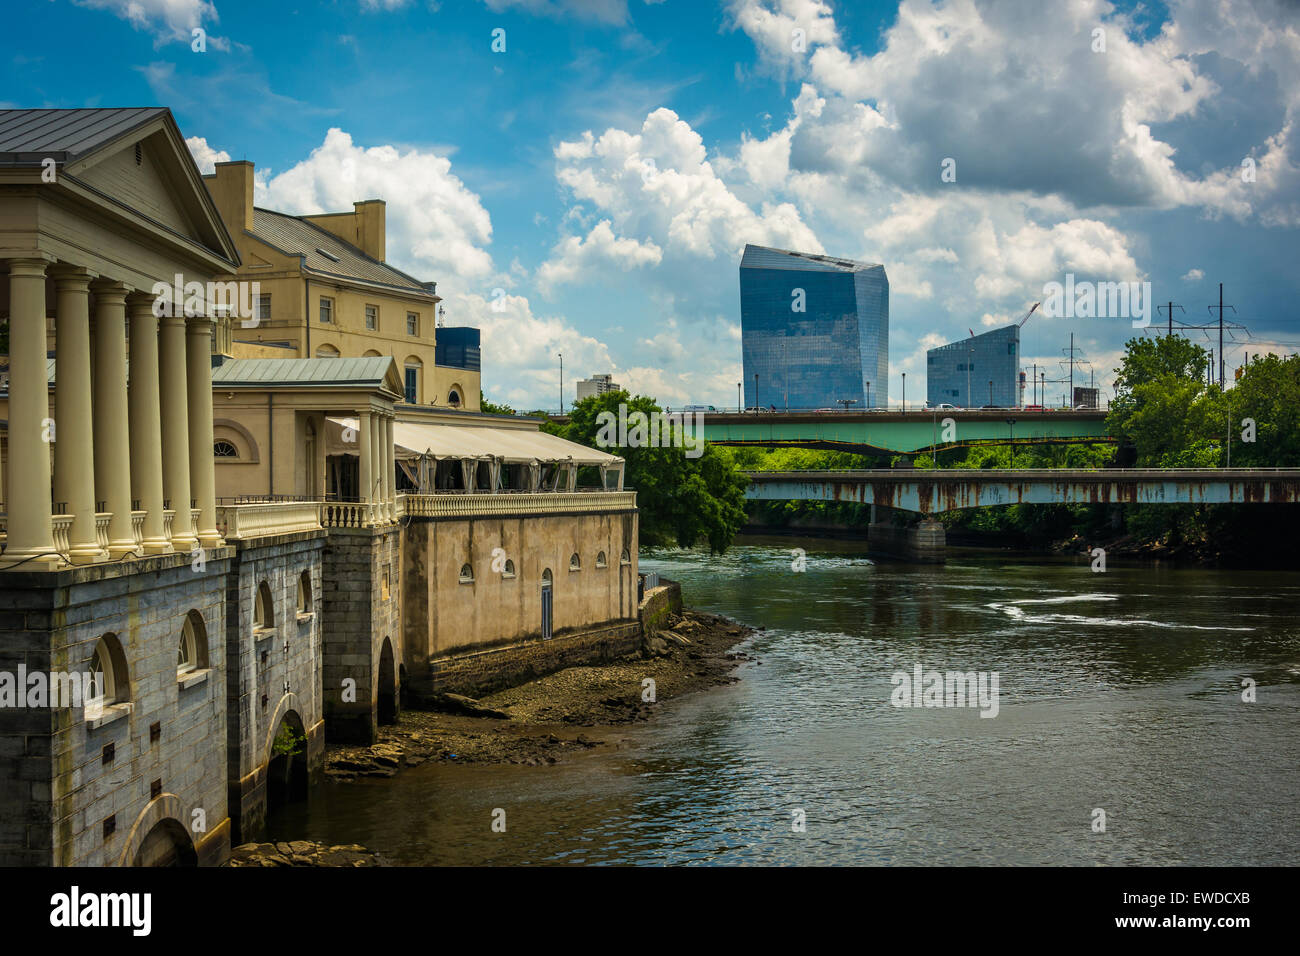 The Fairmount Water Works and buildings along the Schuylkill River in Philadelphia, Pennsylvania. Stock Photo